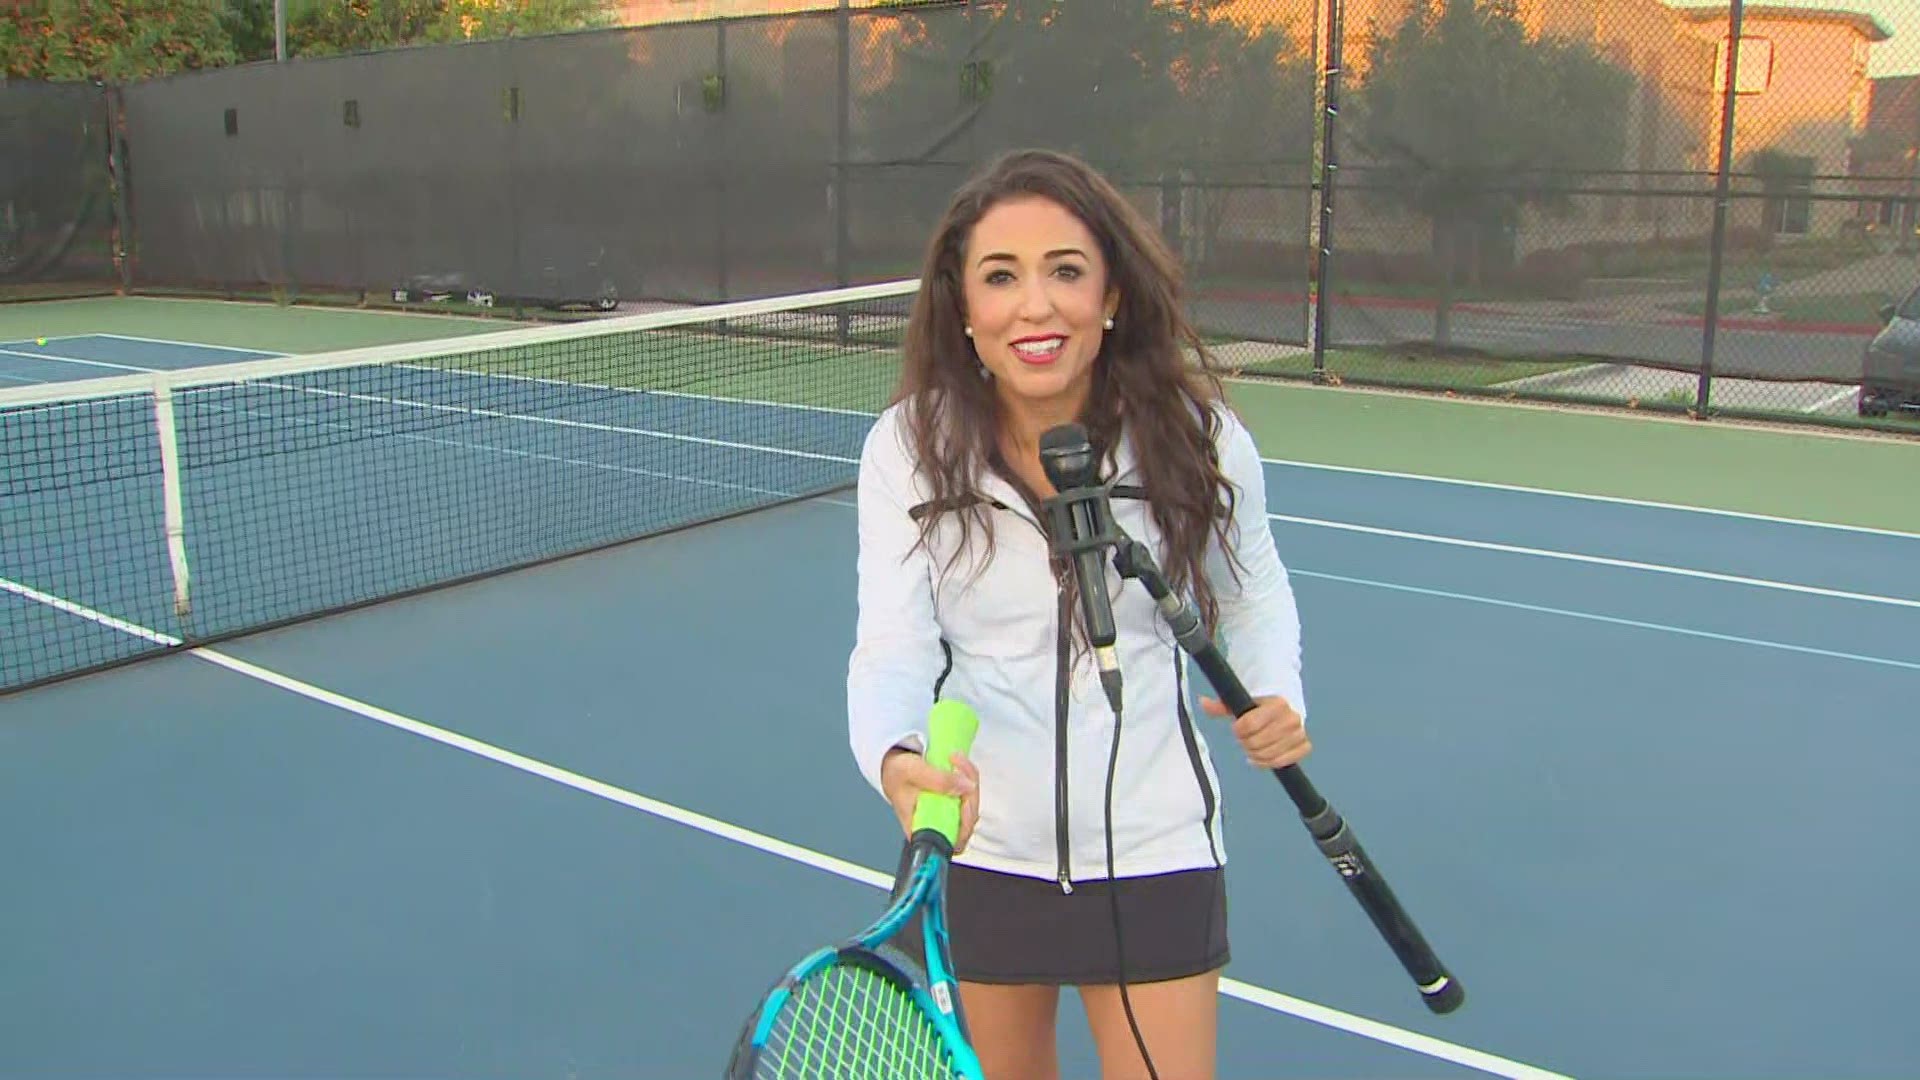 Health & Wellness Reporter Sonia Azad talks about the physical and emotional benefits of going outside and playing tennis.